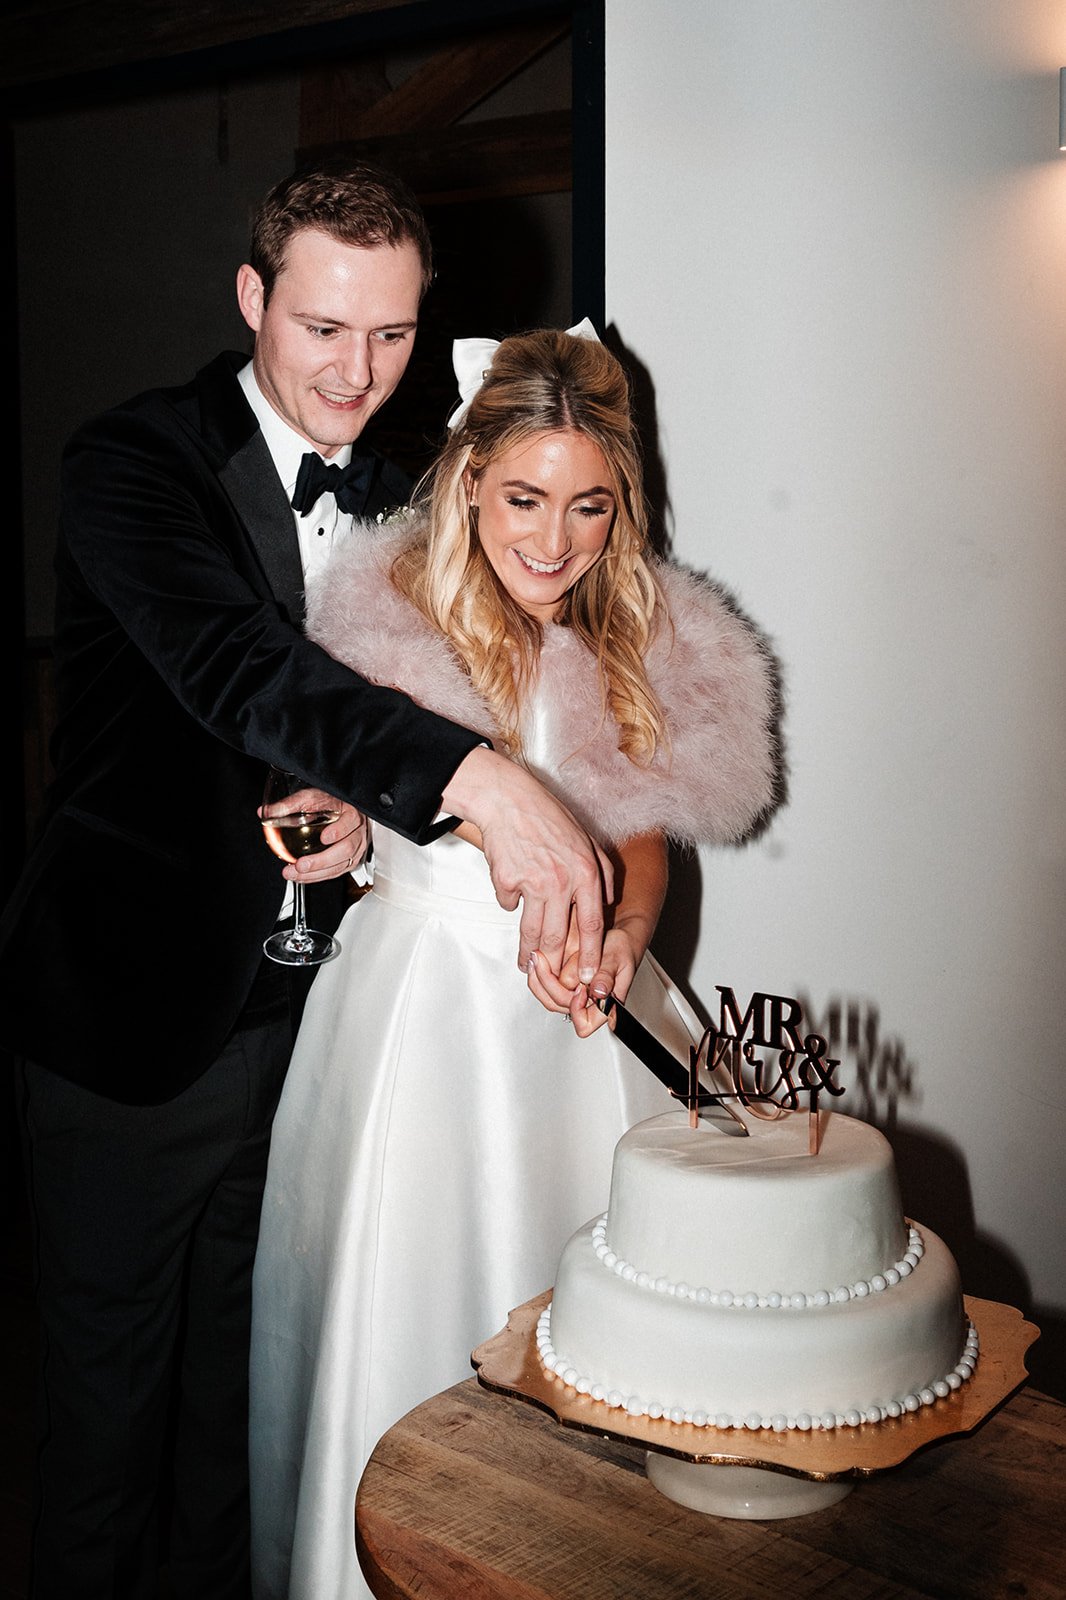 The bride and groom cut their two tier wedding cake with a large knife